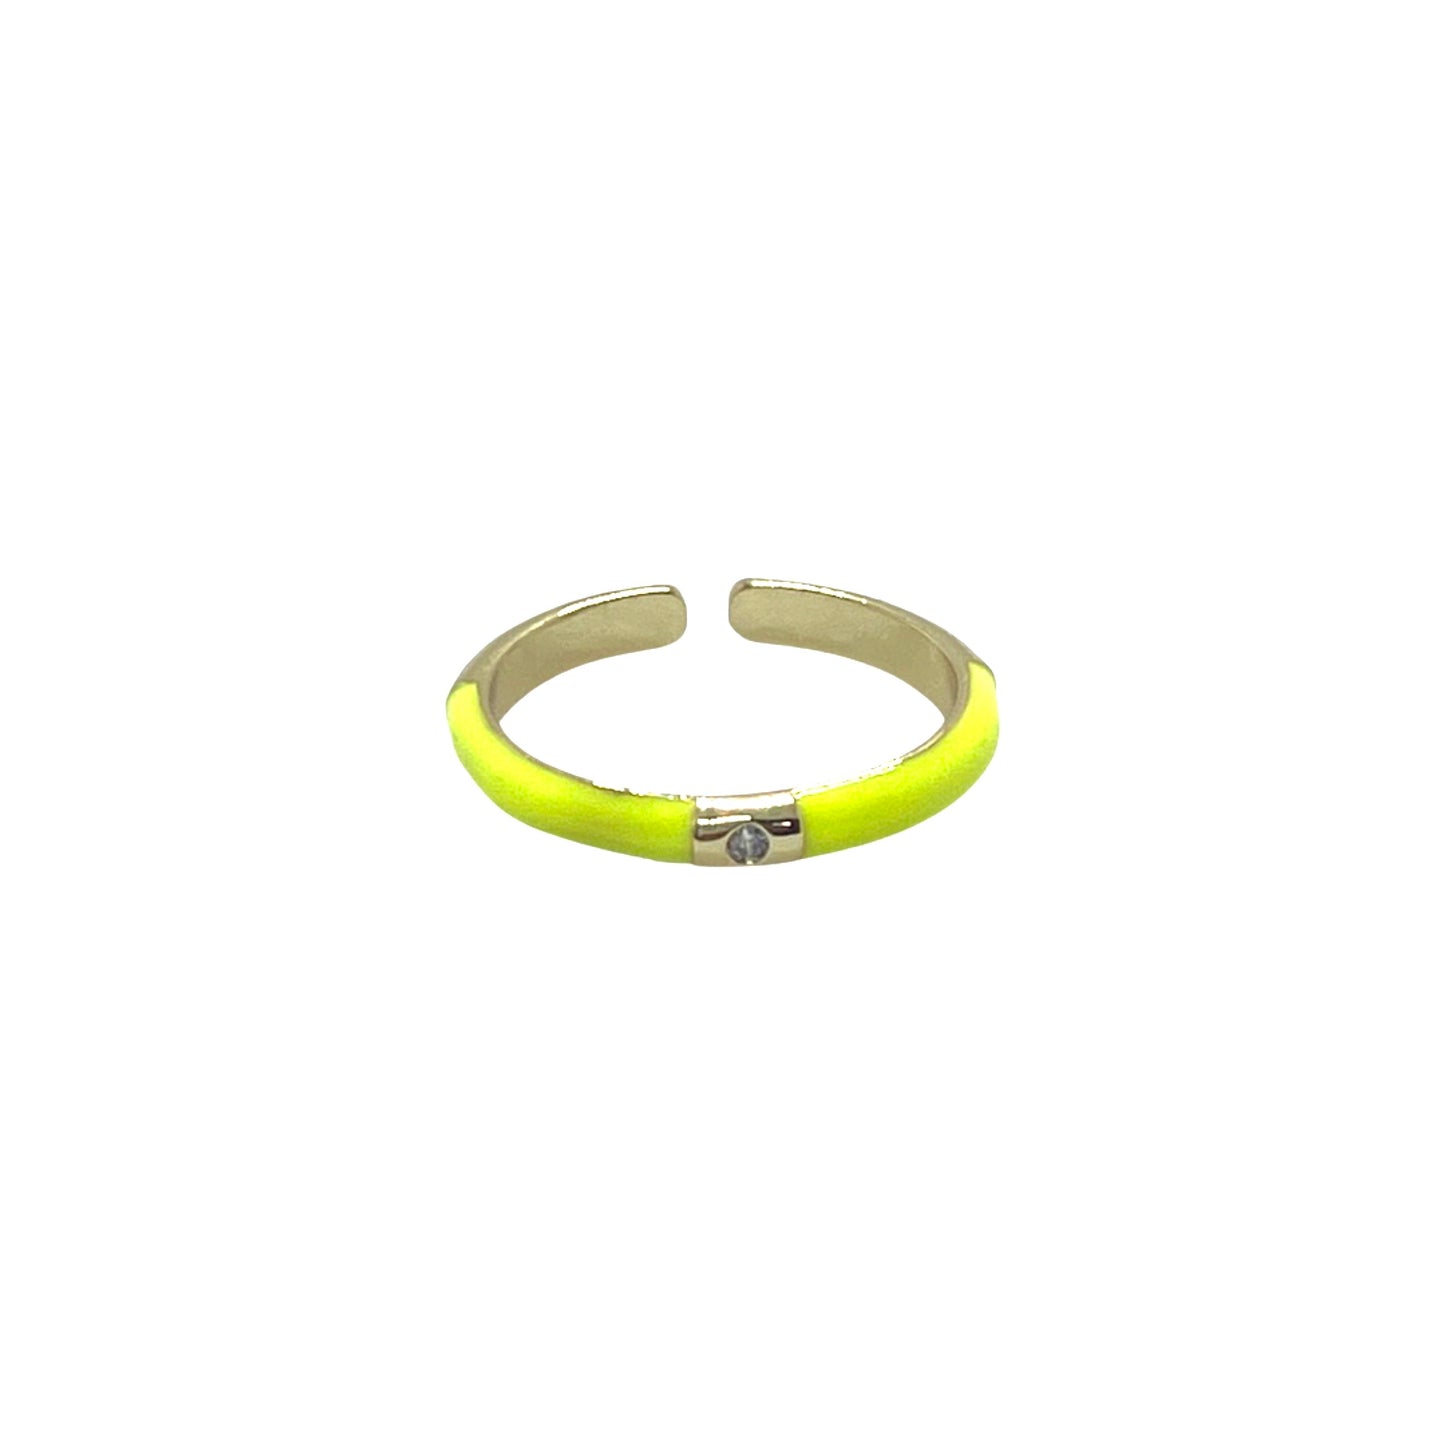 Colored Thin Adjustable Rings